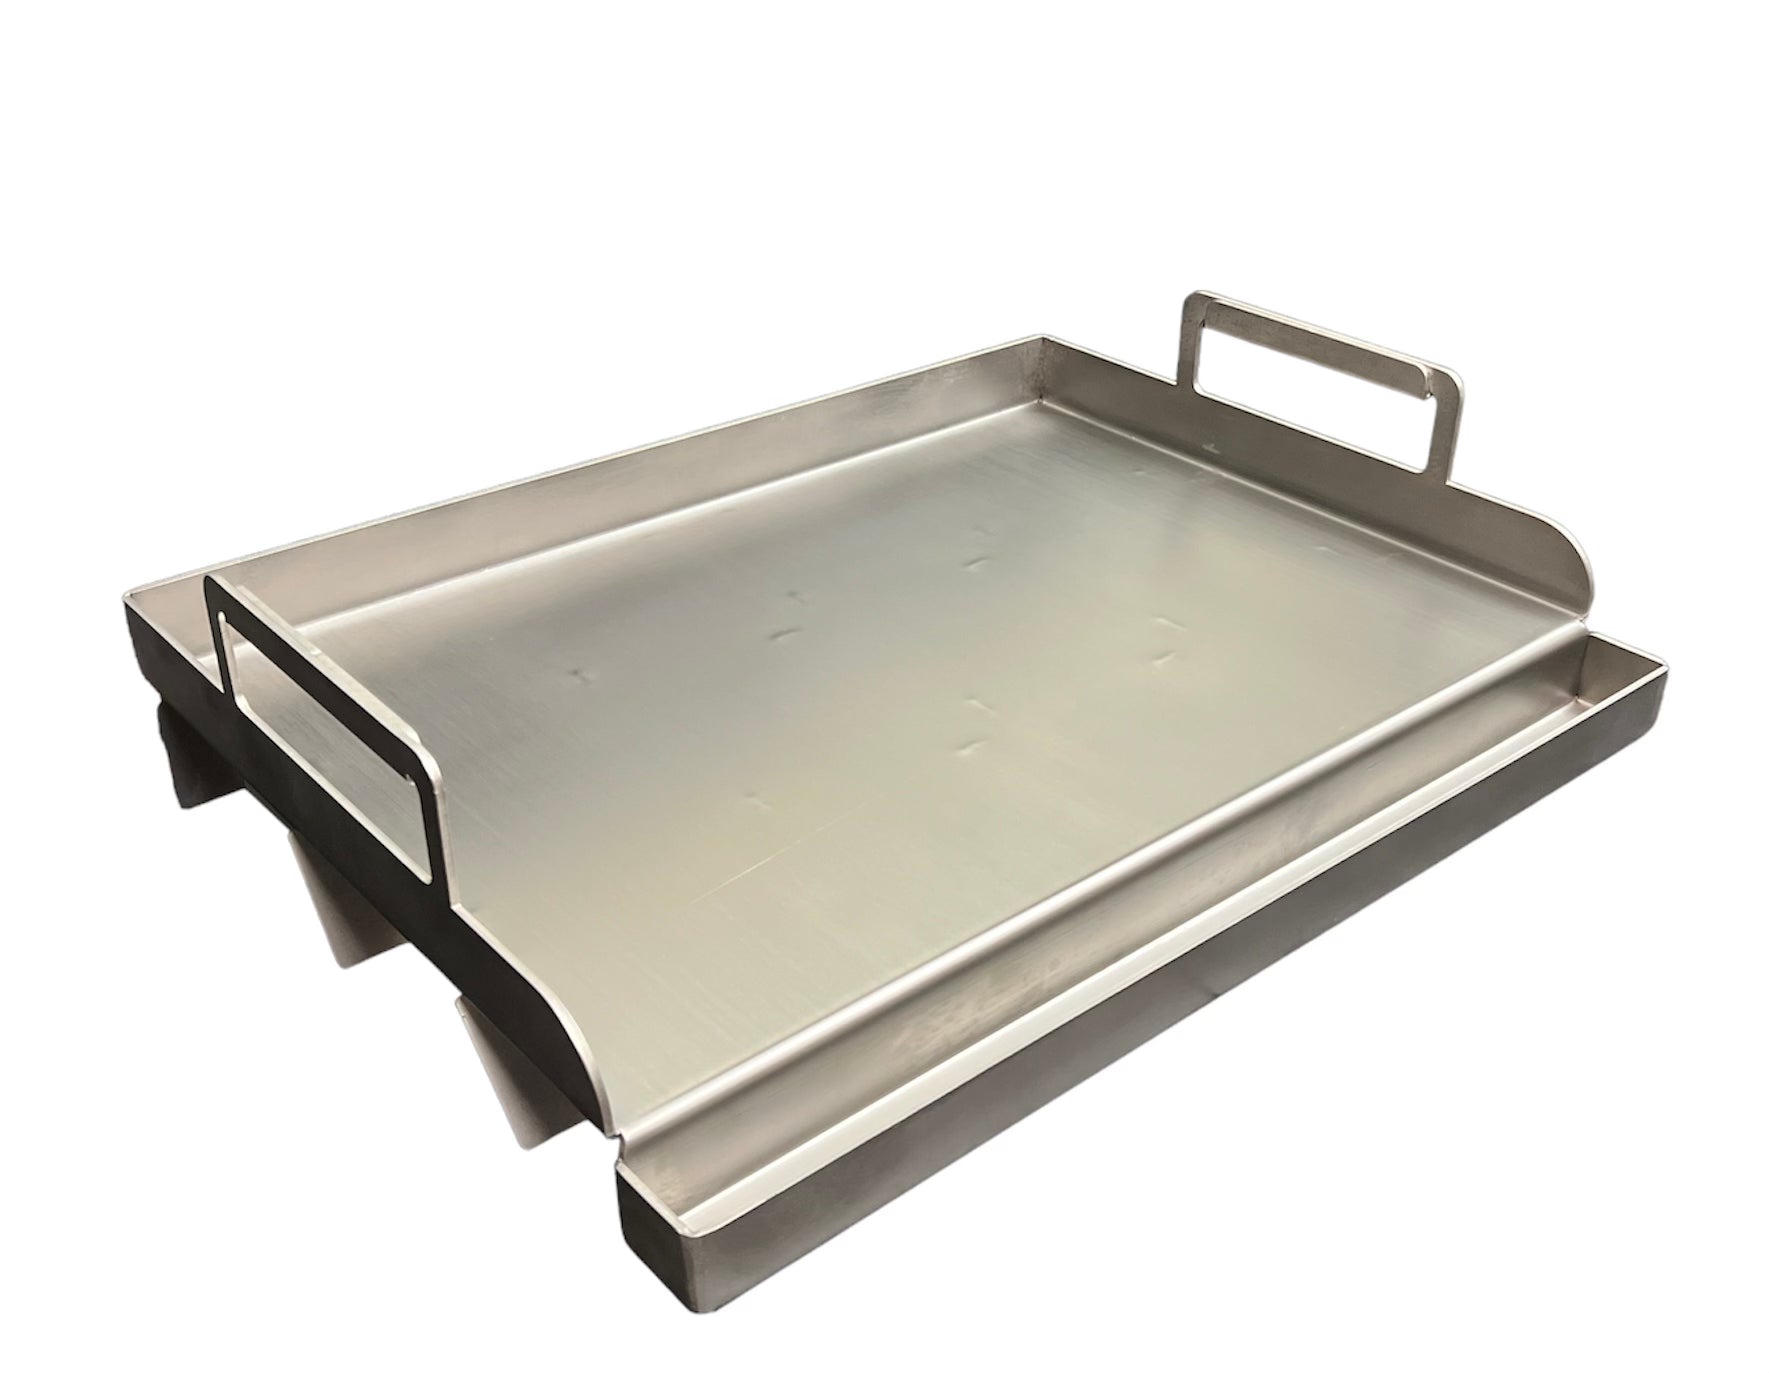 Hasty Bake Stainless Griddle - Fits Suburban/Continental/Ranger